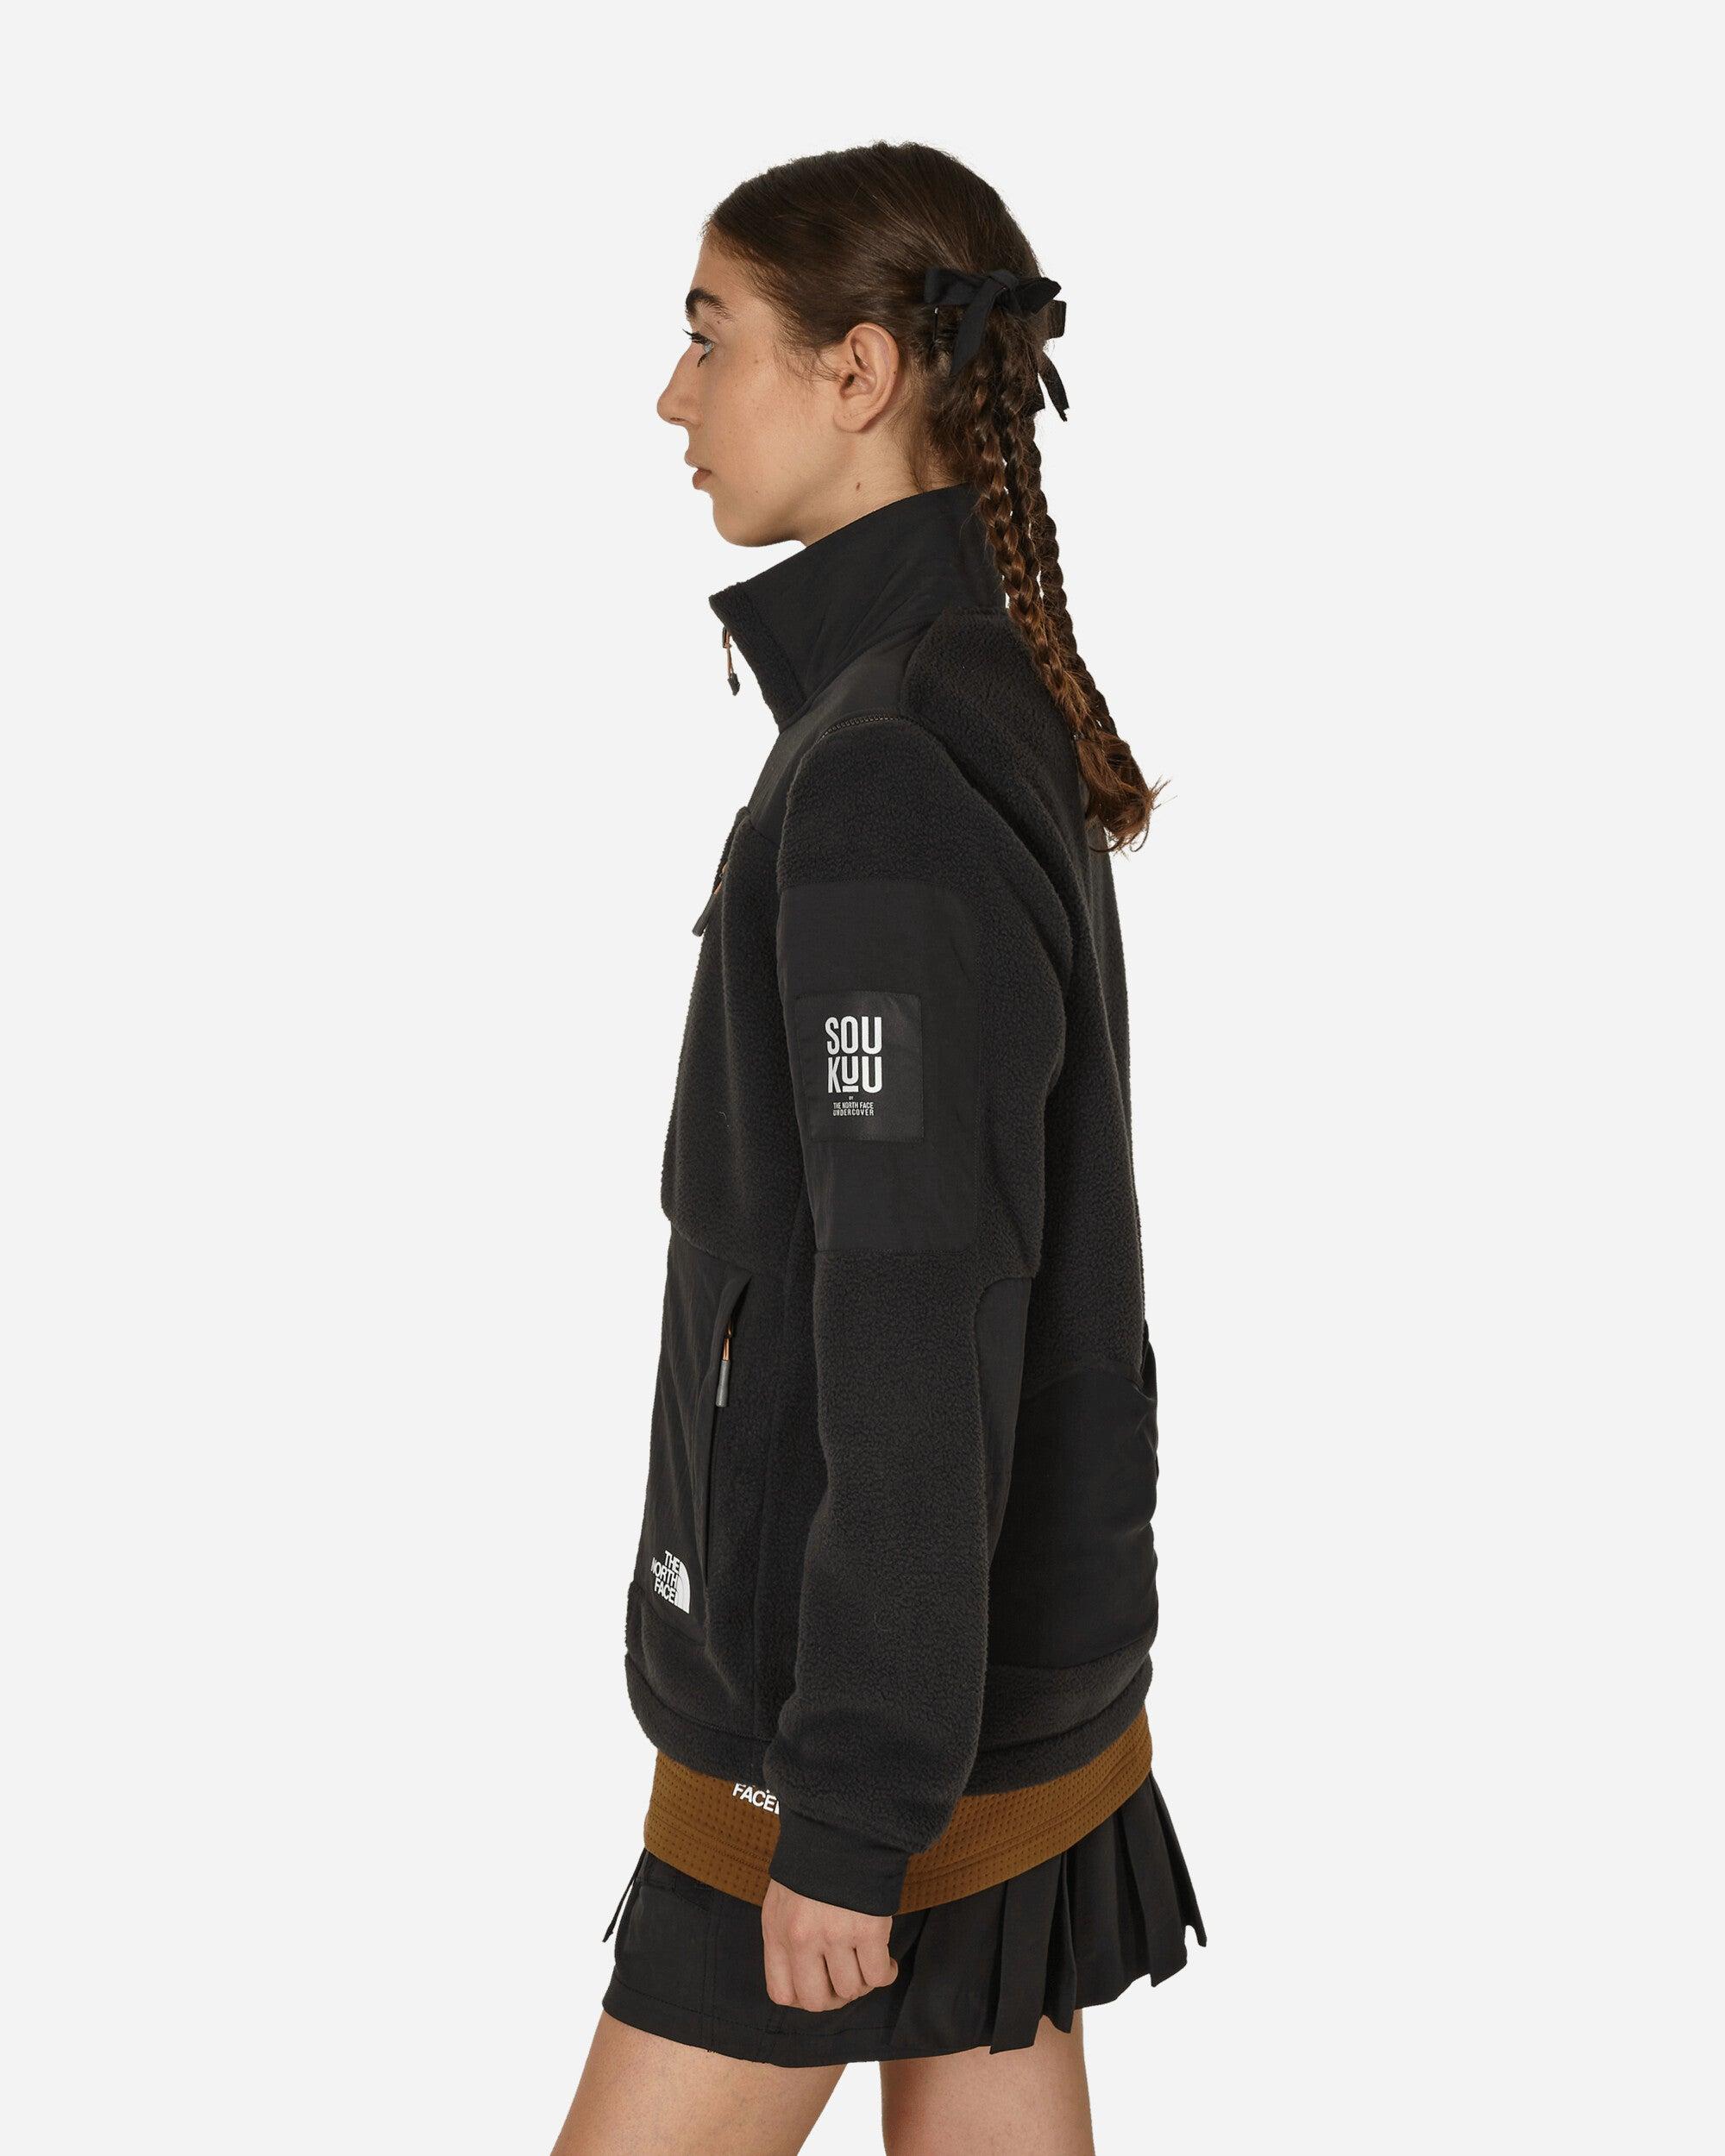 The North Face Project X Undercover Soukuu Zip-off Fleece Jacket